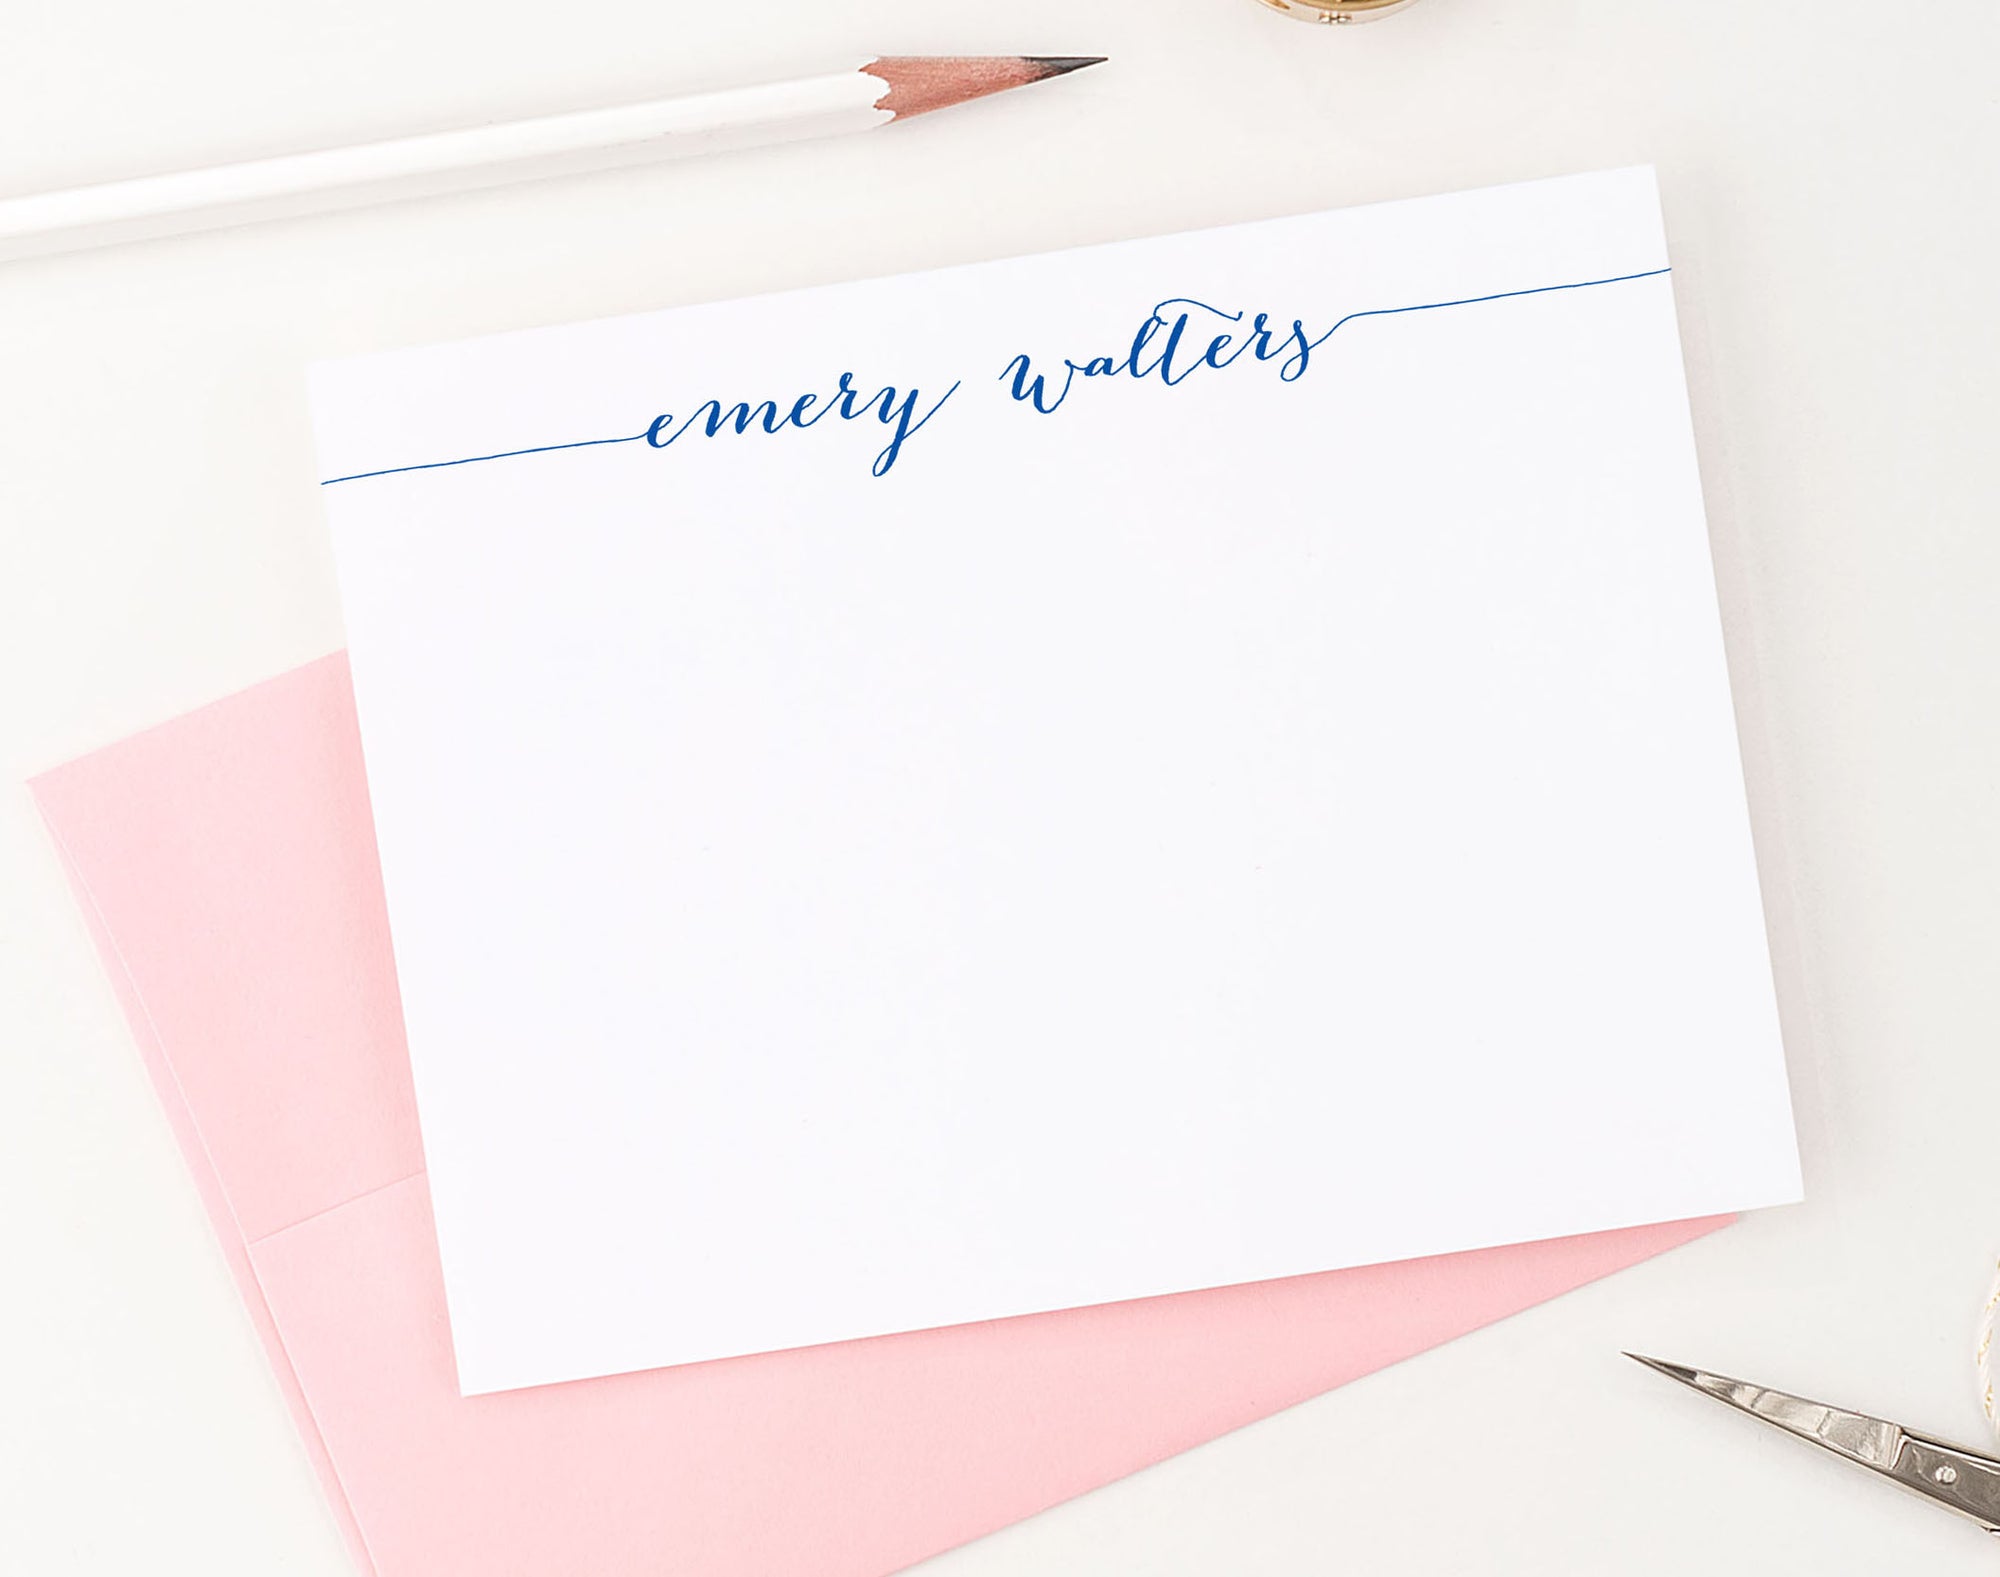 A Note From Personalized Stationery Cards with Modern Script Name